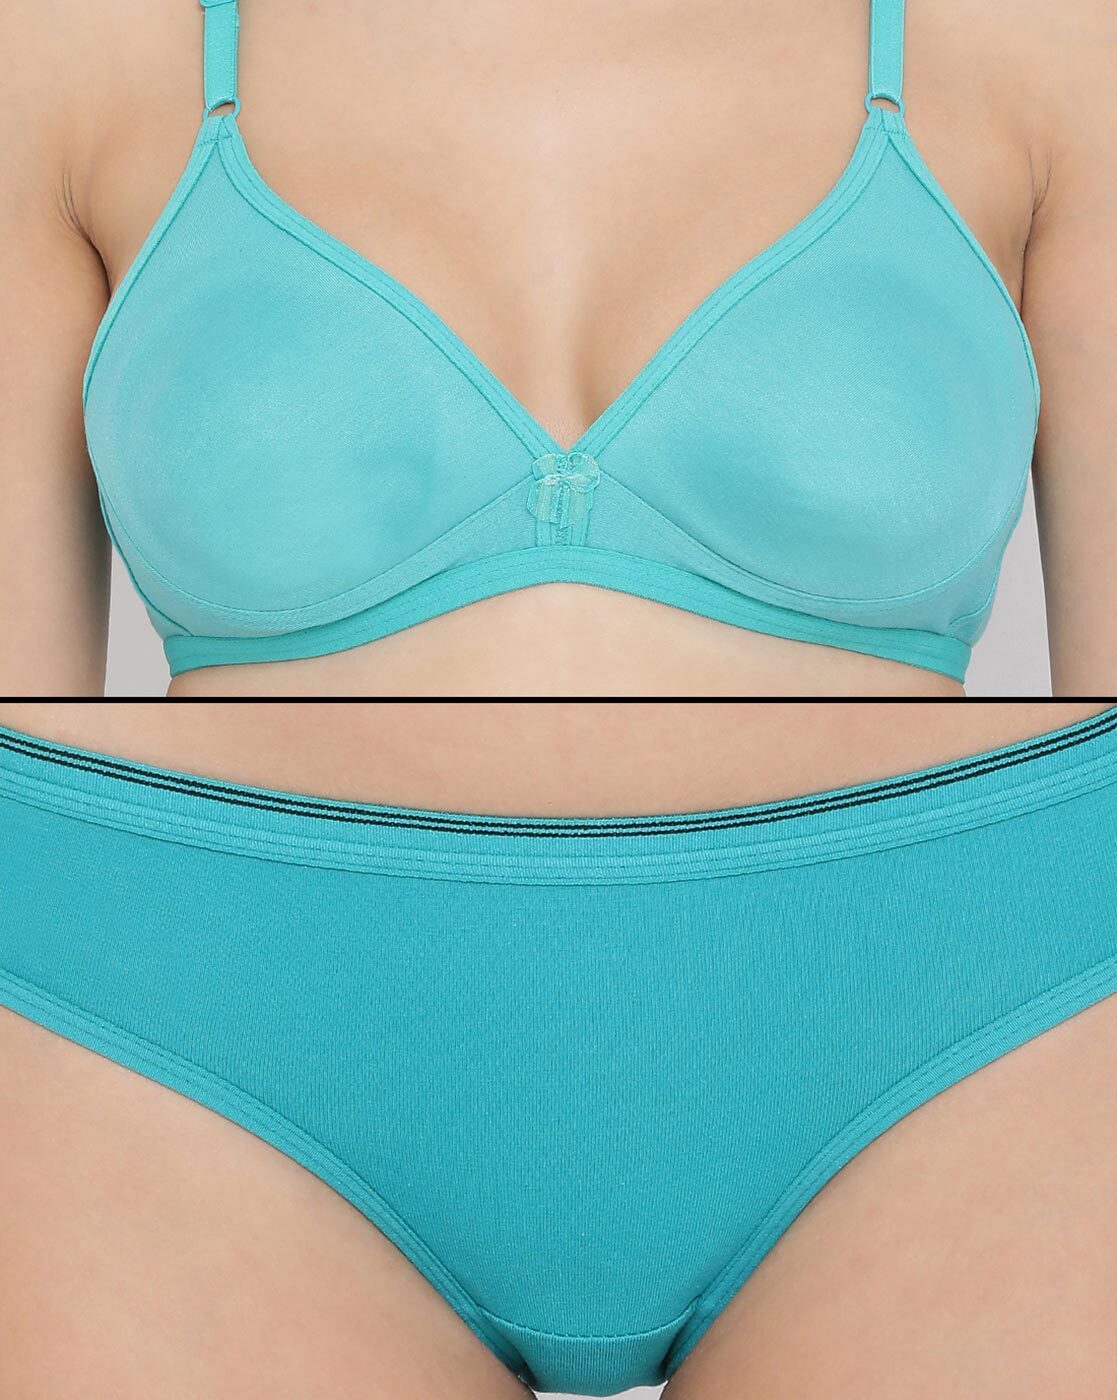 Buy 3 Pcs Set Of Sky Blue - Sea Green Color Bra, Panty And Night Slip  Online India, Best Prices, COD - Clovia